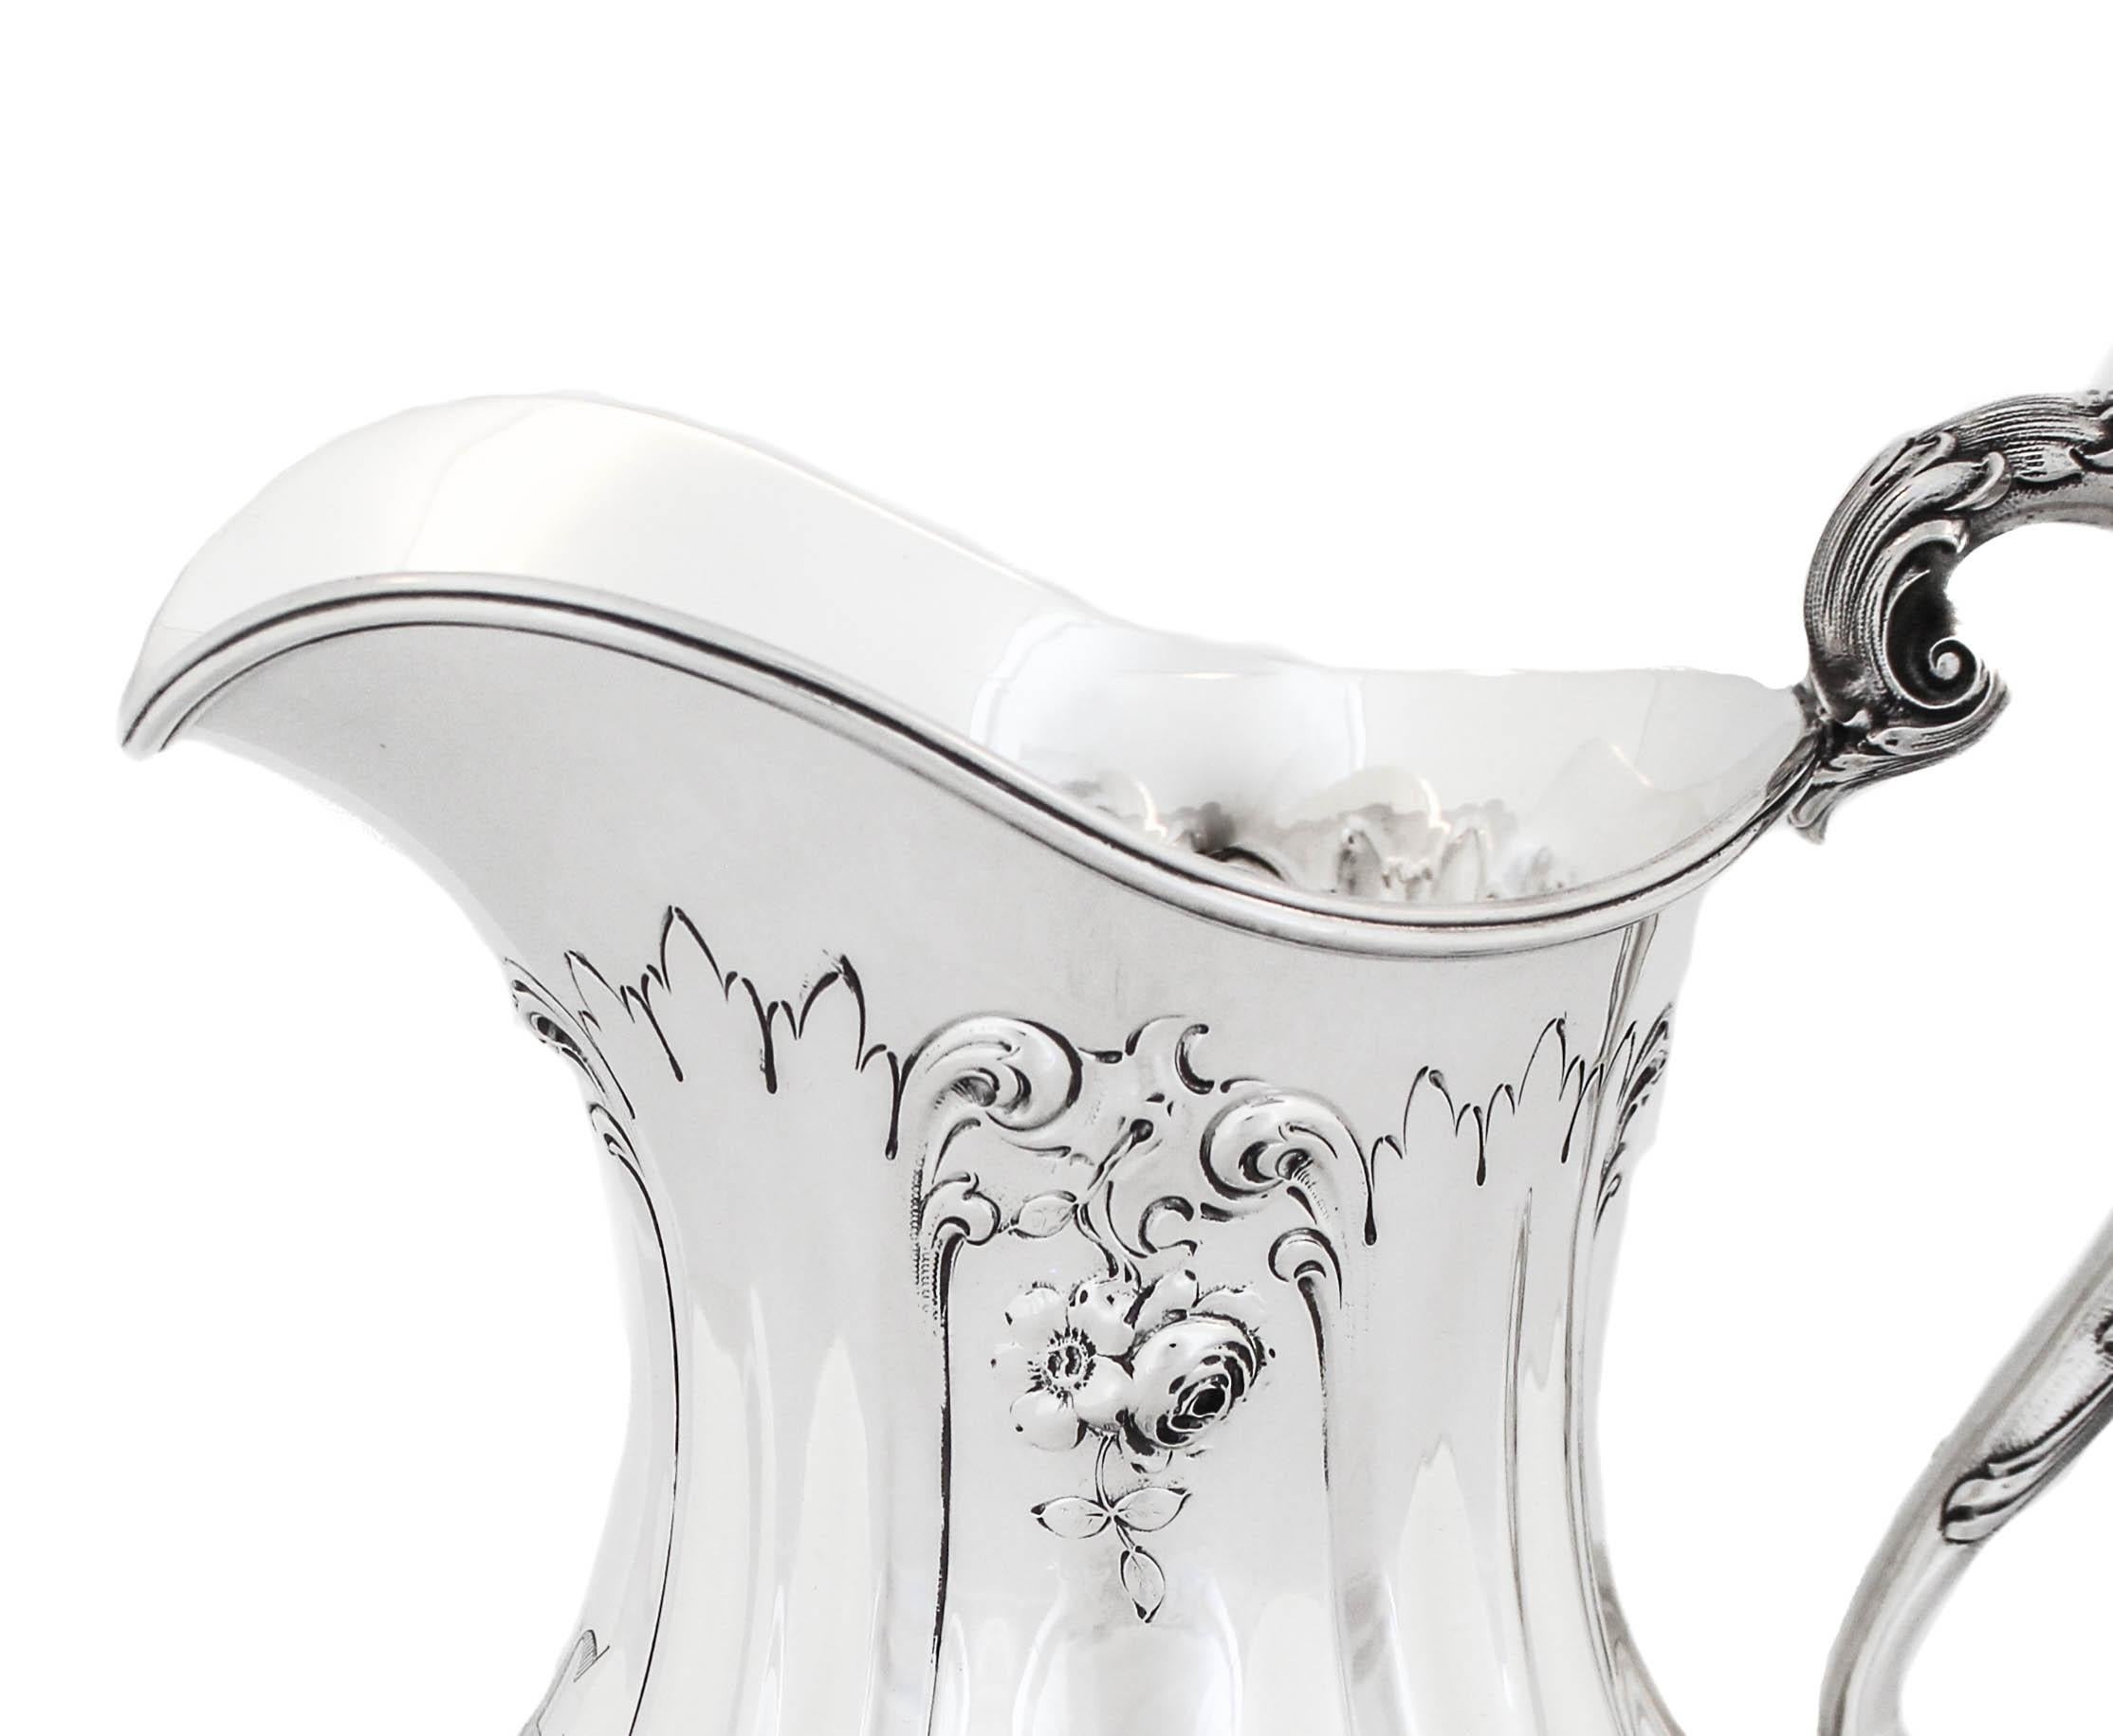 Being offered is a sterling silver water pitcher by The Mauser Manufacturing Company of New York.  One of the most respected names in the sterling silver industry, Mauser is very sought after and collected.  Here we have a lovely example of a large